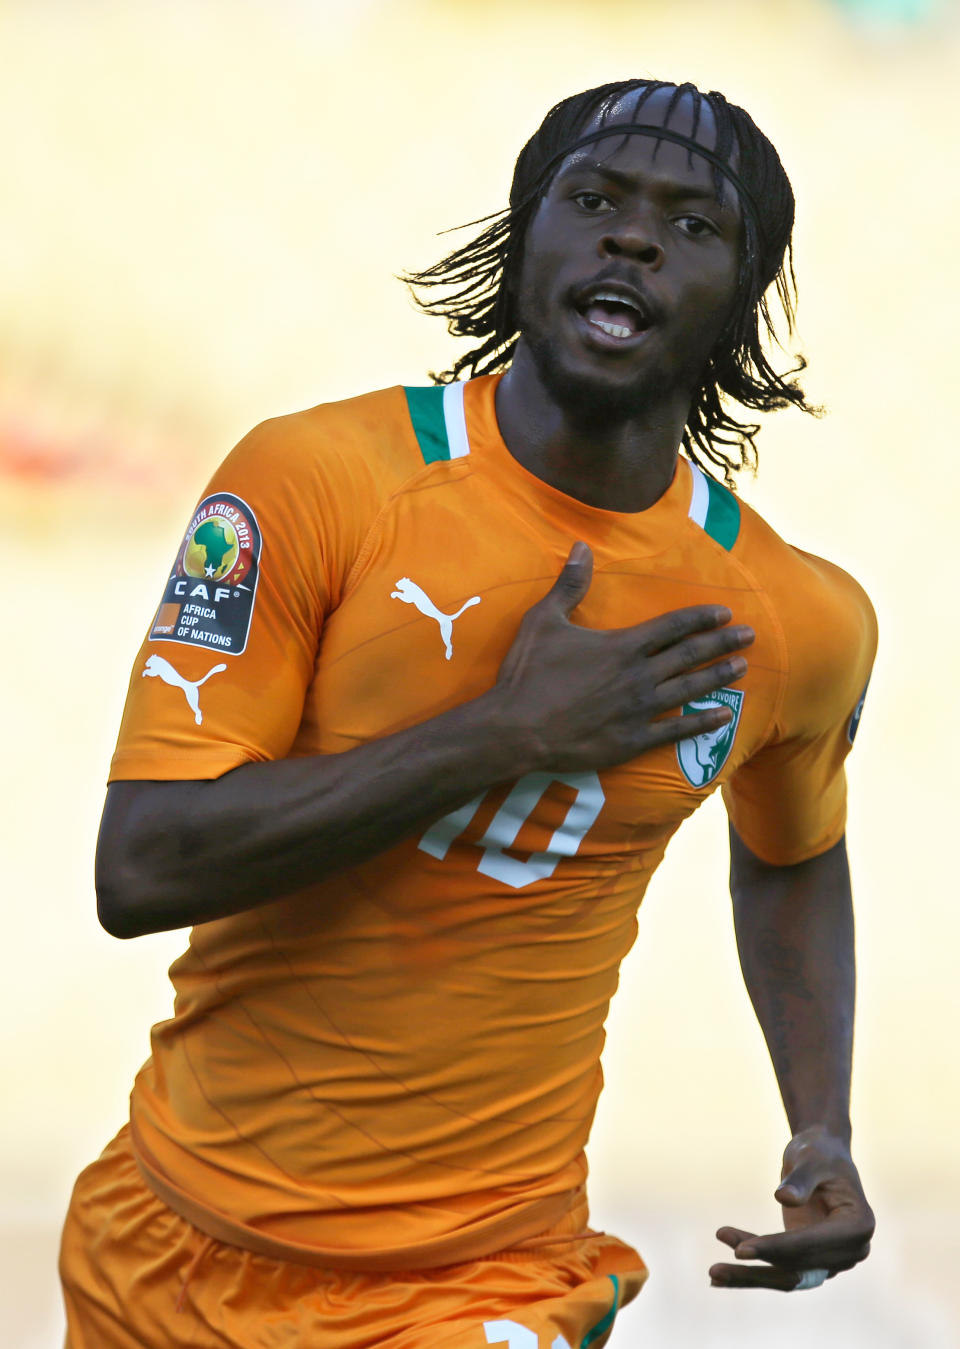 FILE - In this Jan. 26, 2013, file photo, Ivory Coast's Gervinho celebrates after scoring the opening goal against Tunisia during their African Cup of Nations group D match at the Royal Bafokeng stadium in Rustenburg, South Africa. The two other teams in group D are Togo and Algeria. (AP Photo/Armando Franca, File)